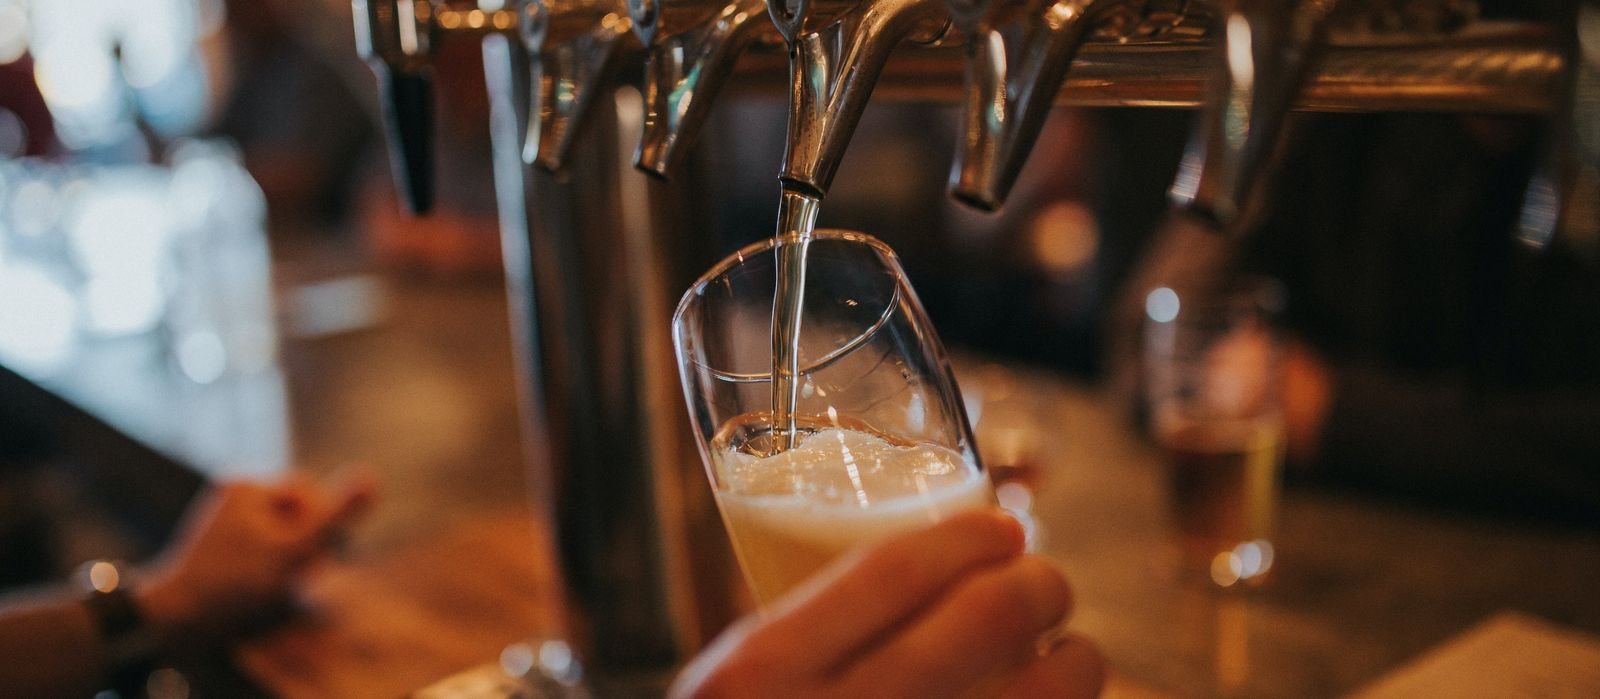 filling glass of beer on tap in arlington heights Peggy Kinanne’s Irish Restaurant 